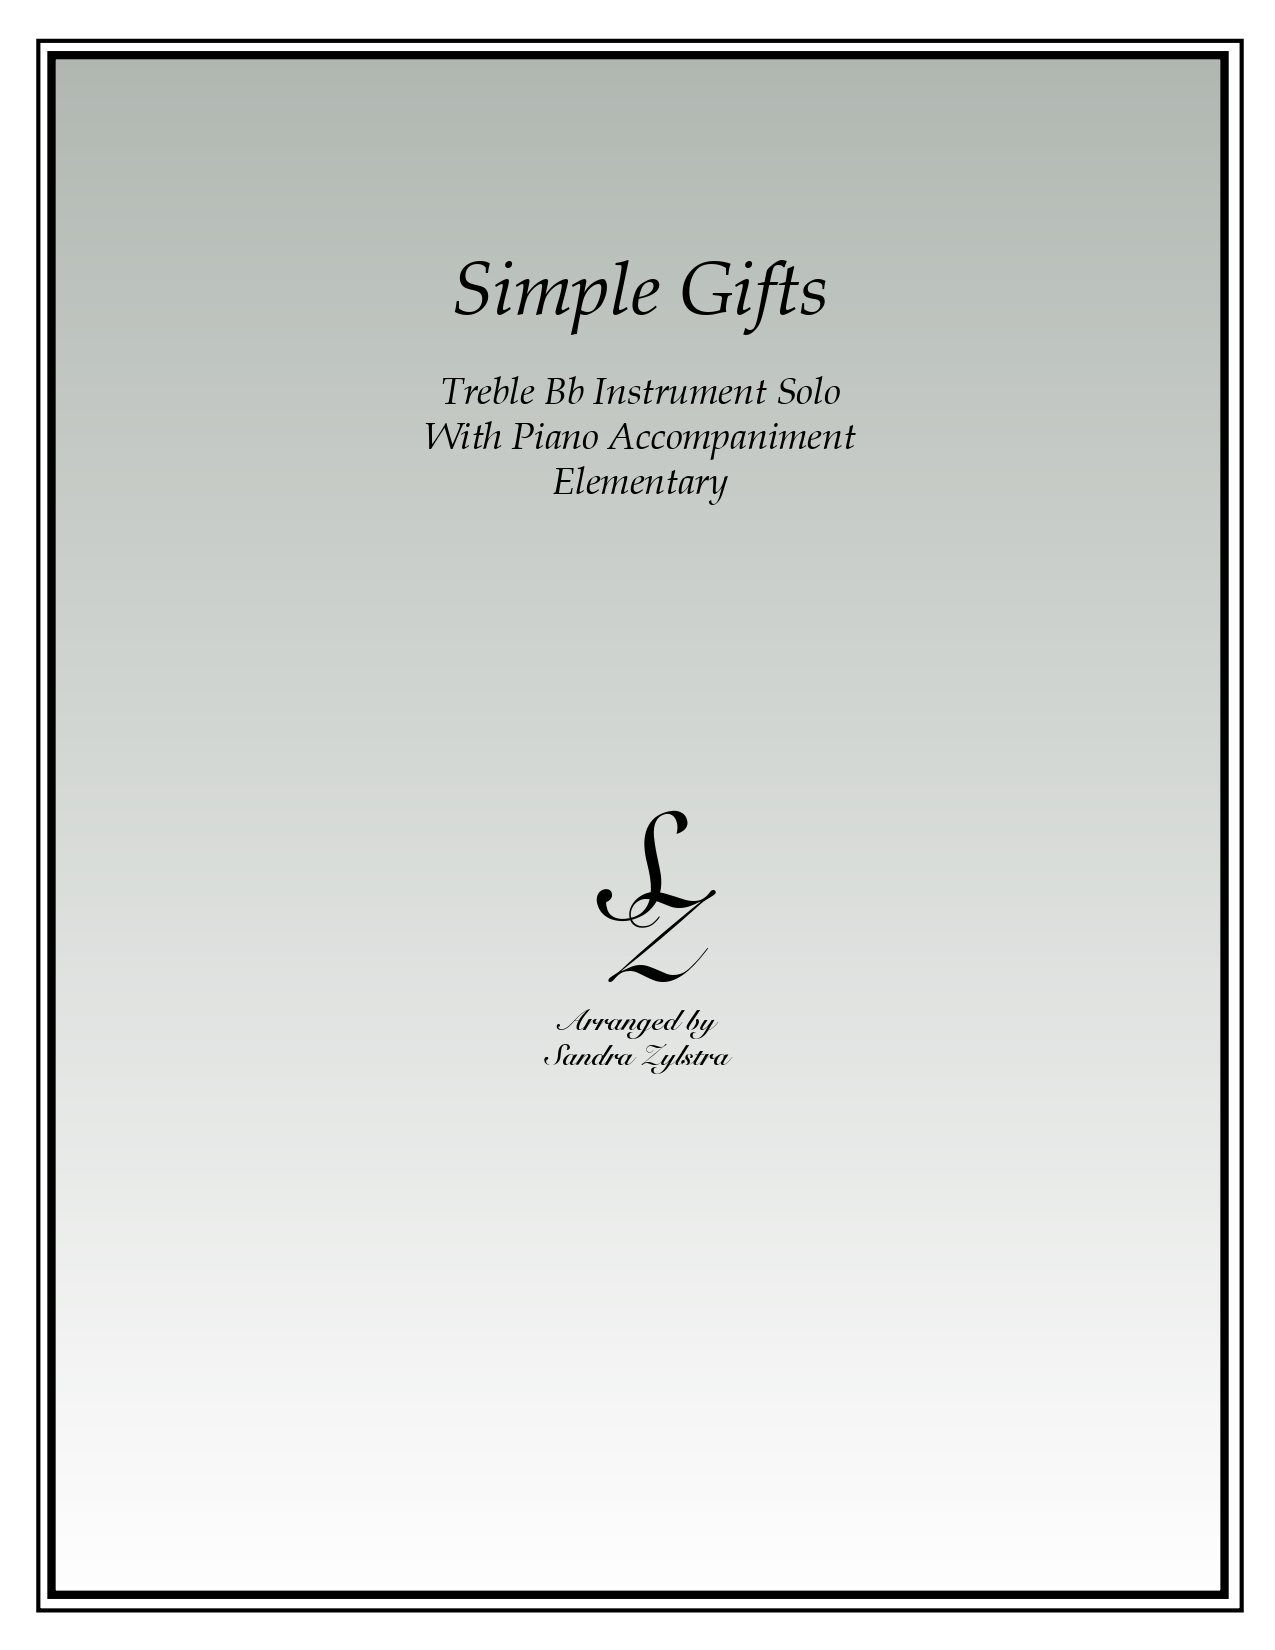 Simple Gifts Bb instrument solo part cover page 00011